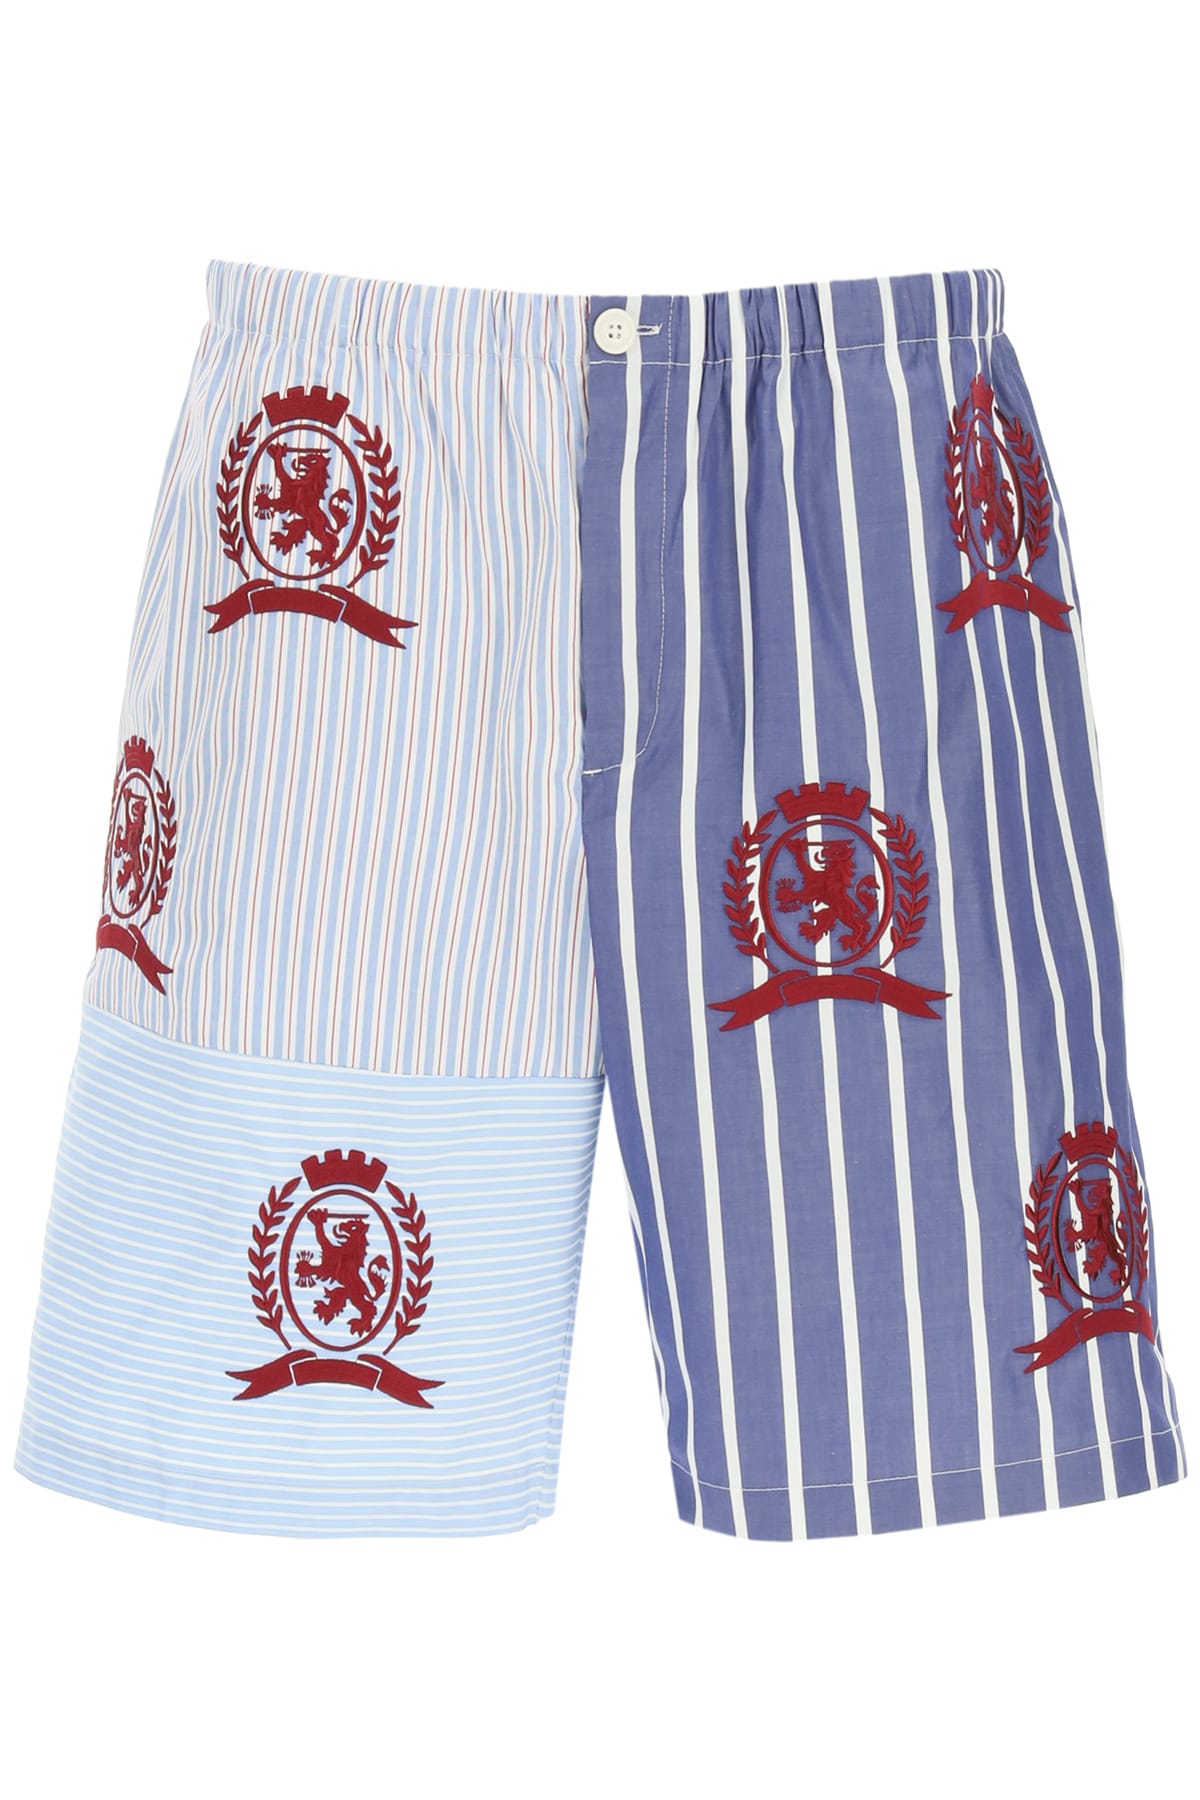 Tommy Hilfiger Striped Shorts With Crests